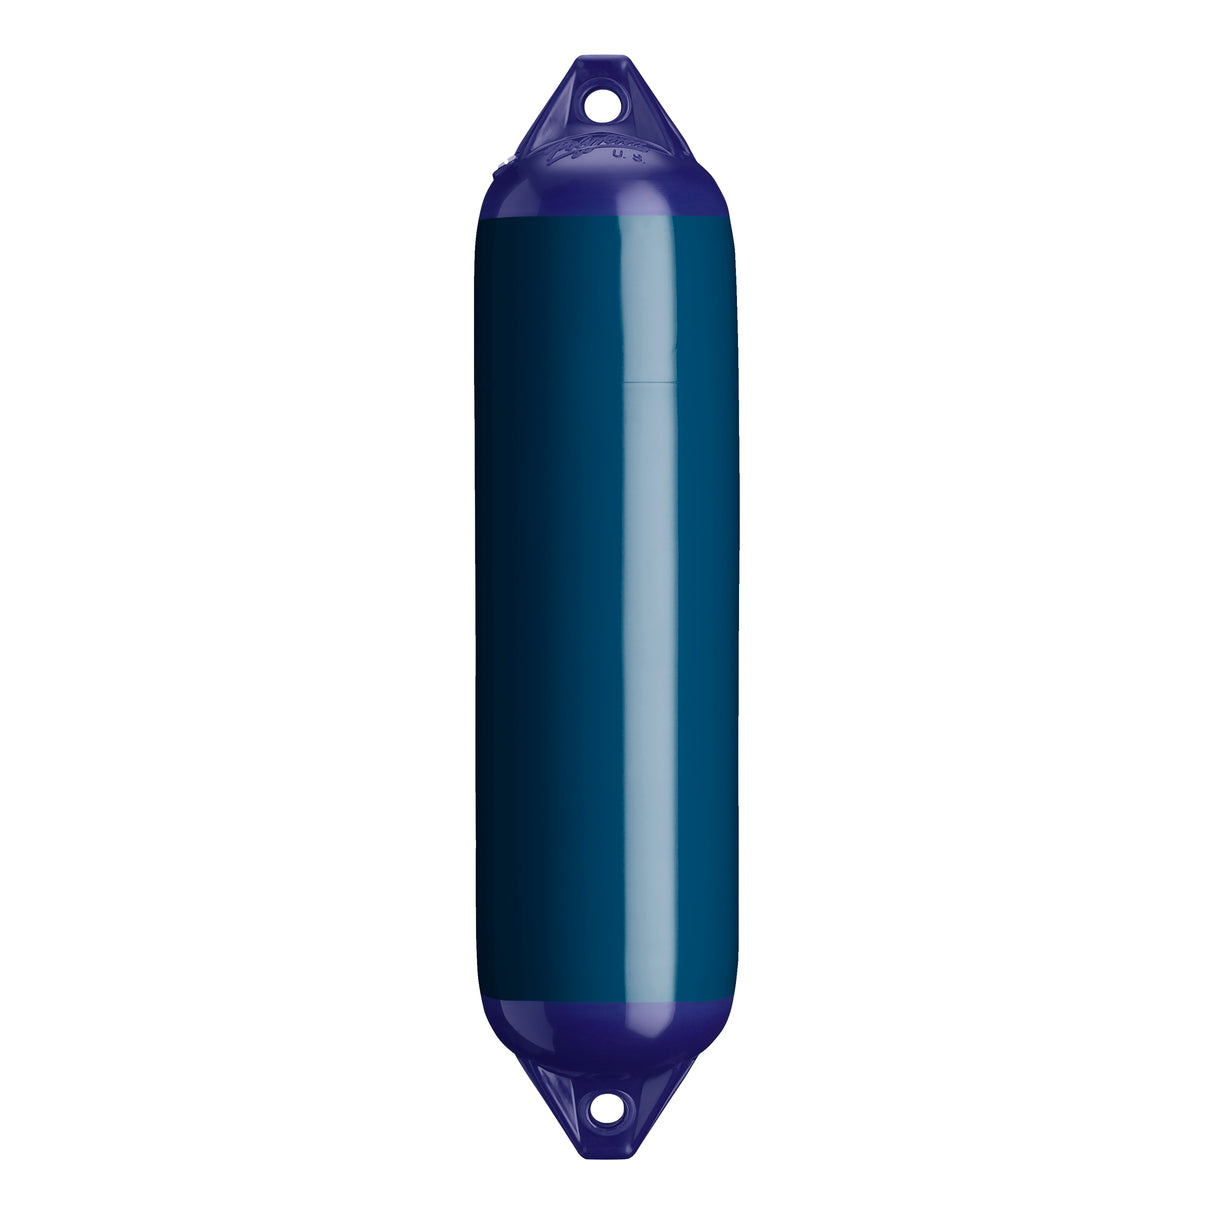 Catalina Blue boat fender with Navy-Top, Polyform F-1 